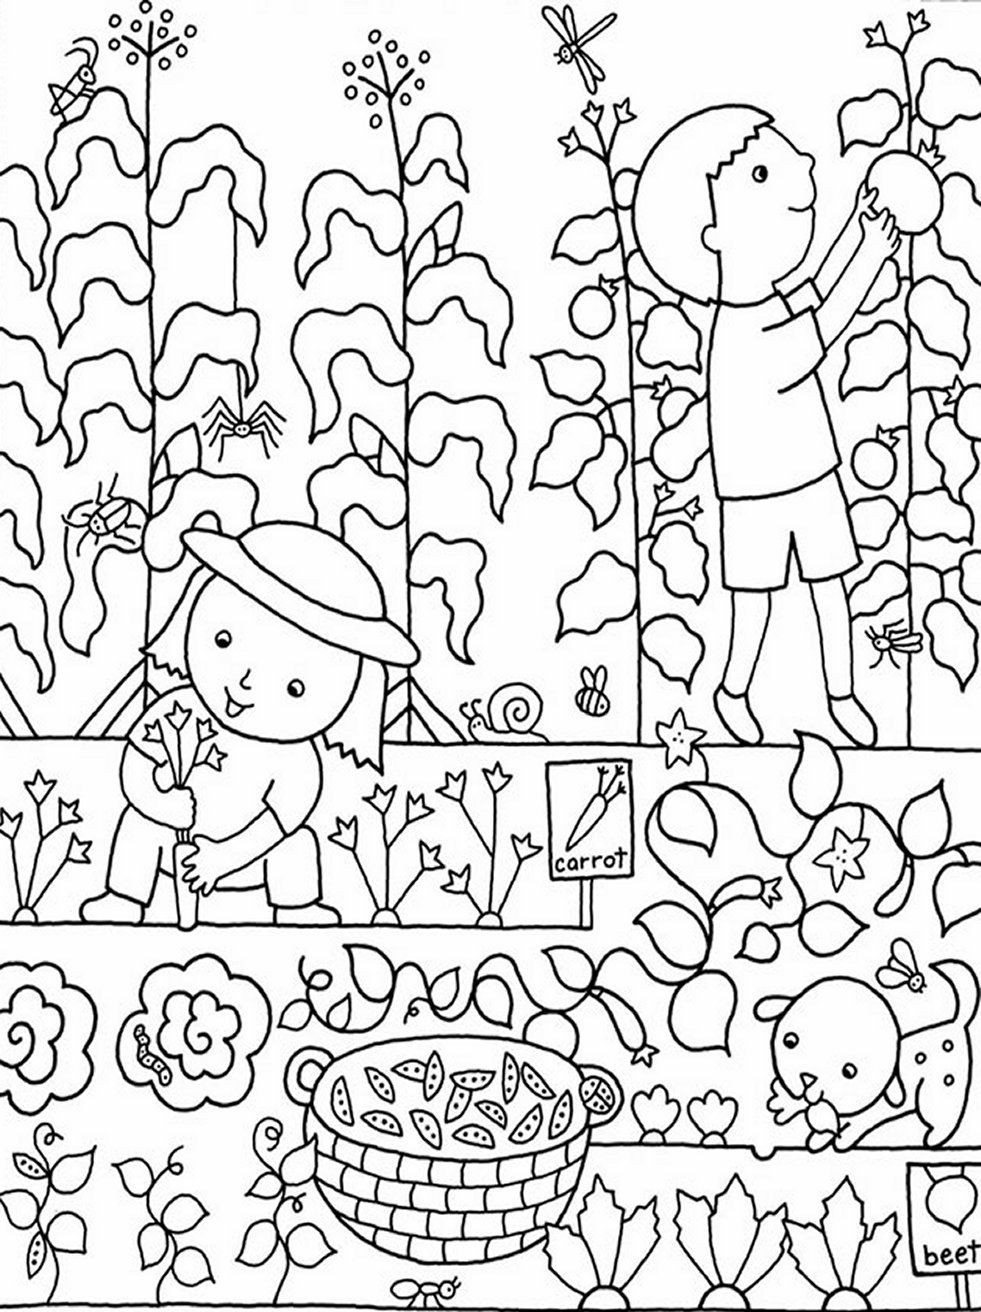 The 25 Best Ideas for Garden Coloring Pages for Kids - Home, Family